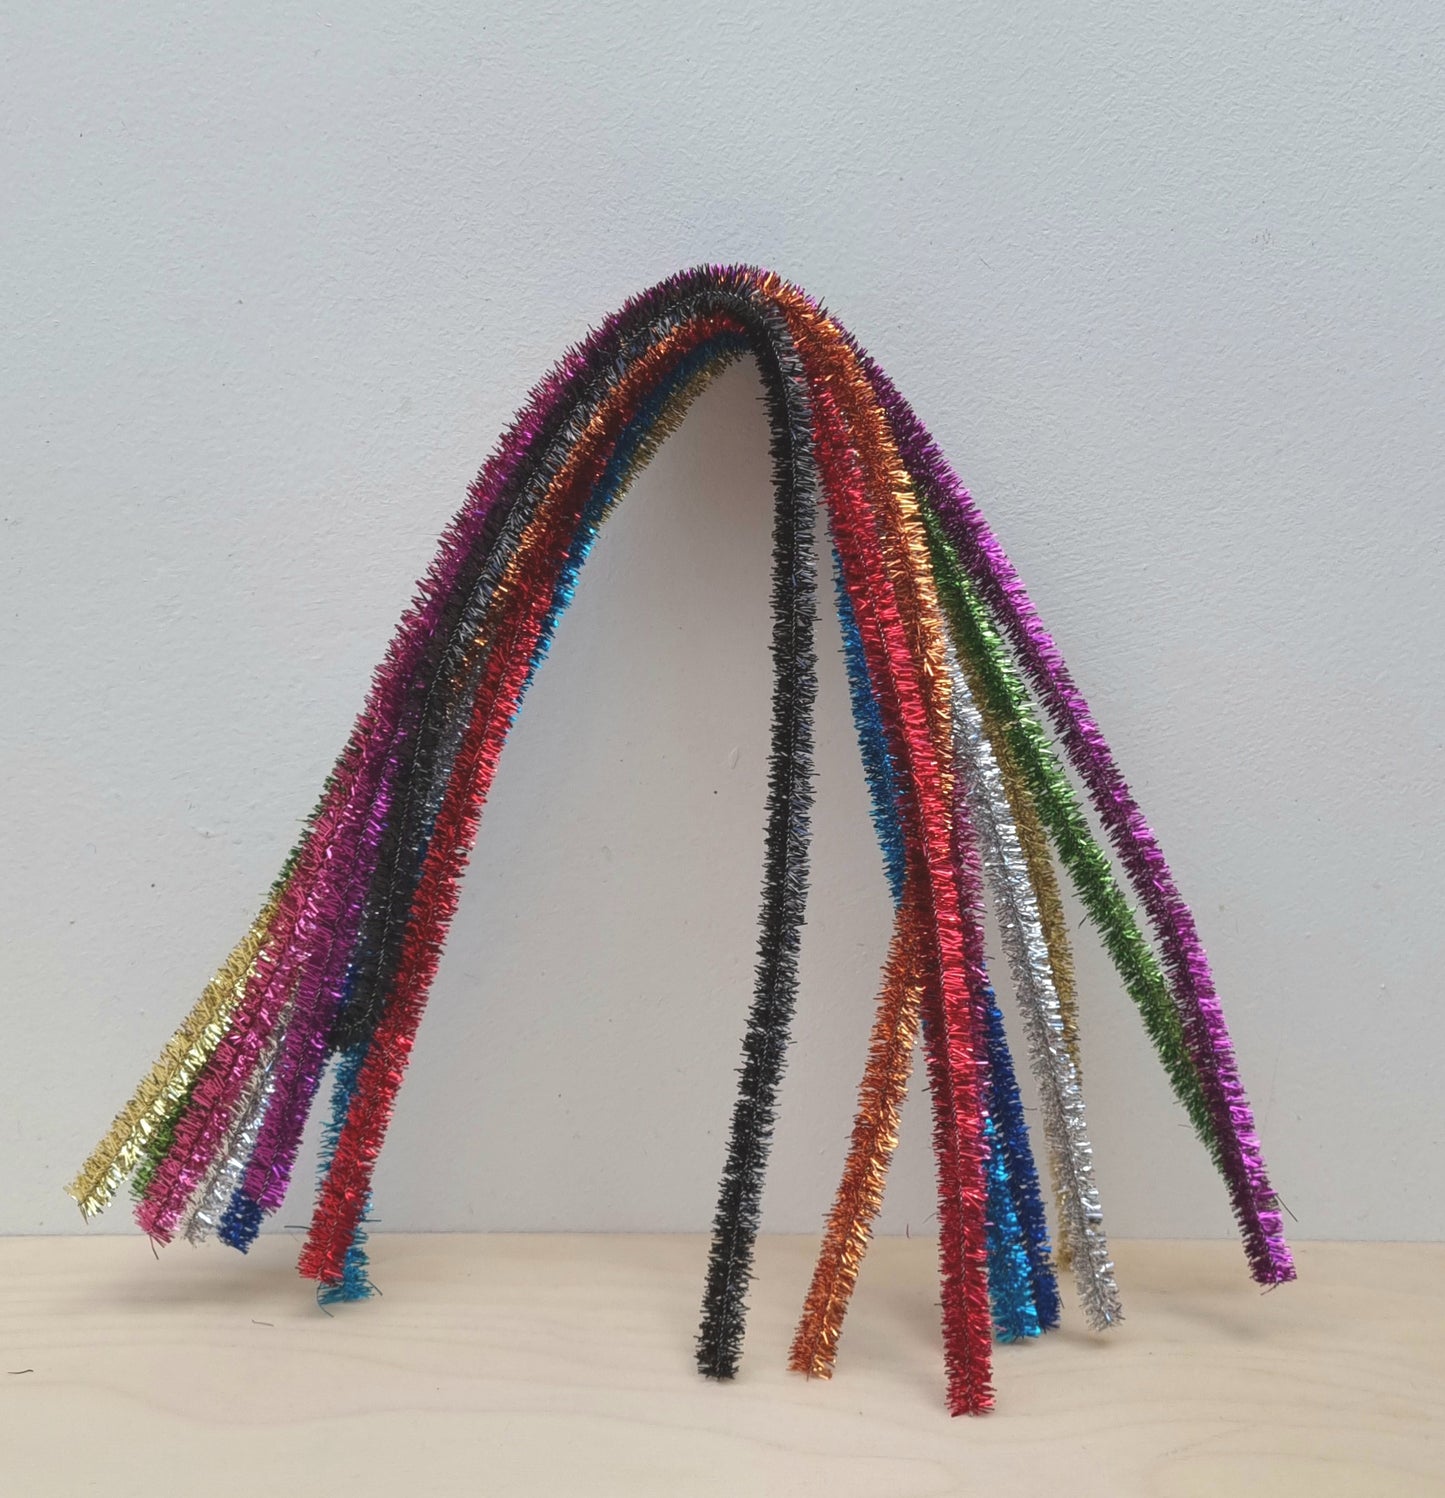 Sparkly pipe cleaners